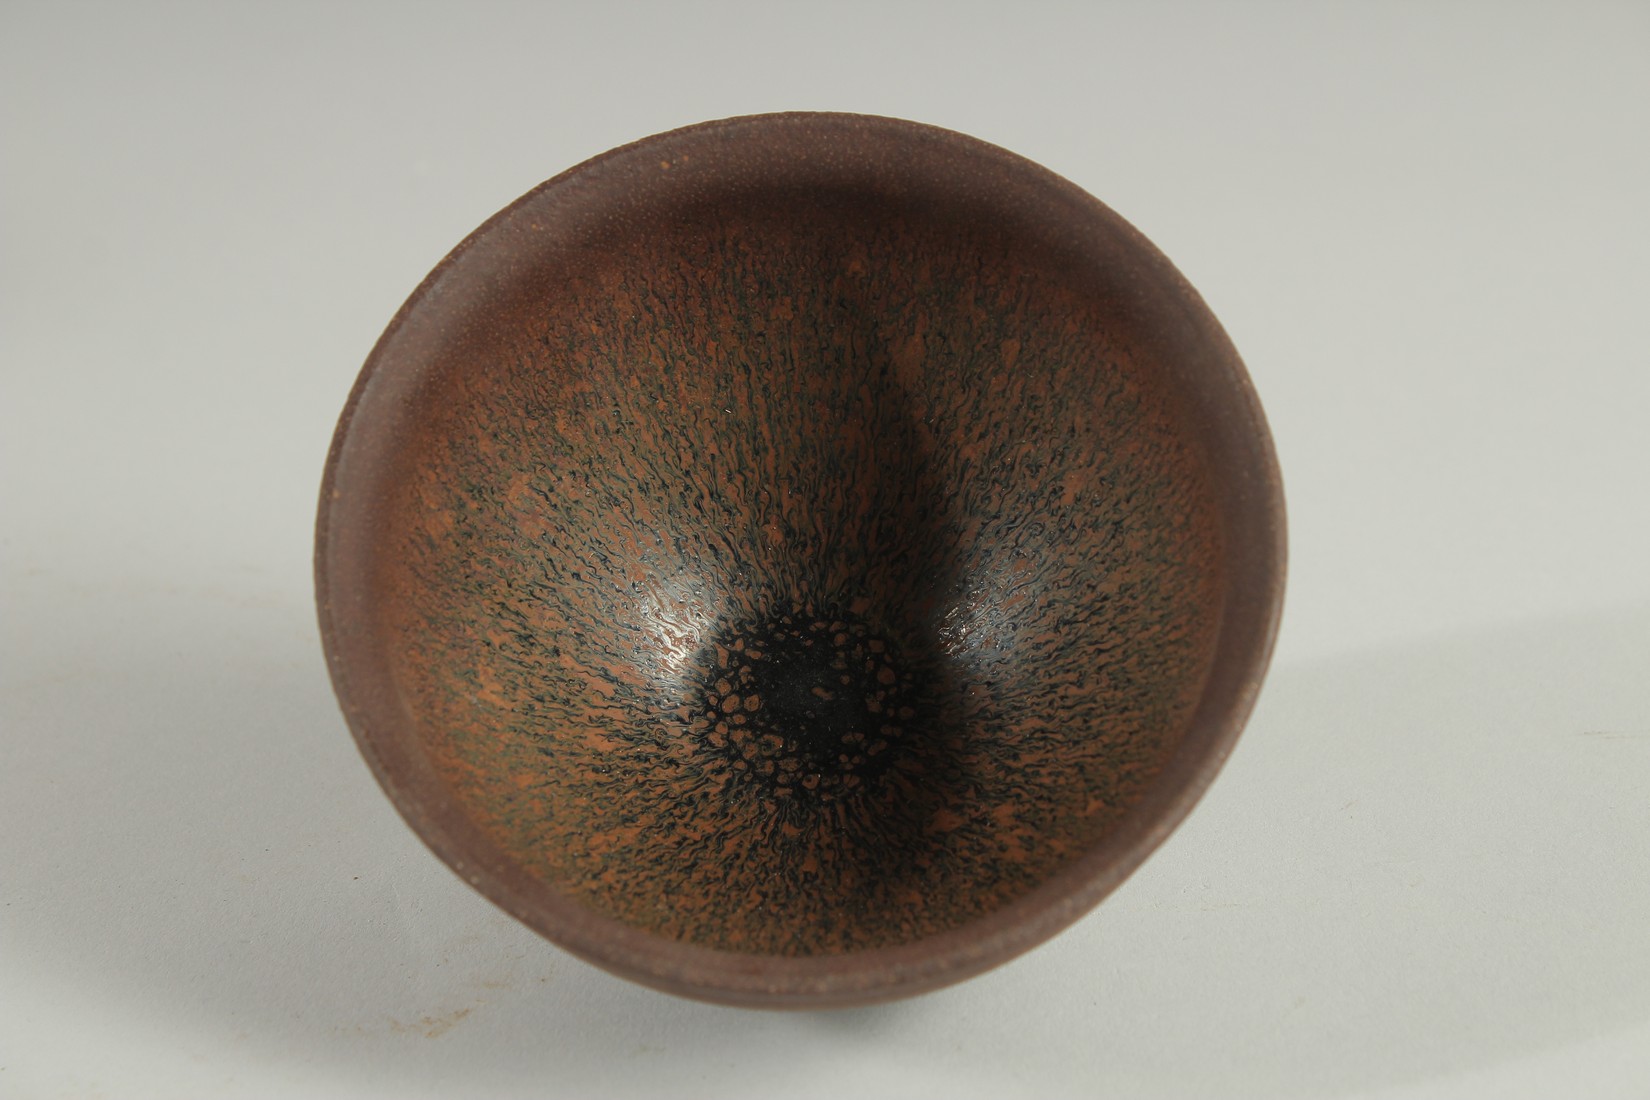 A CHINESE JIAN WARE BOWL, with hare's fur glaze, 12.5cm diameter. - Image 4 of 5